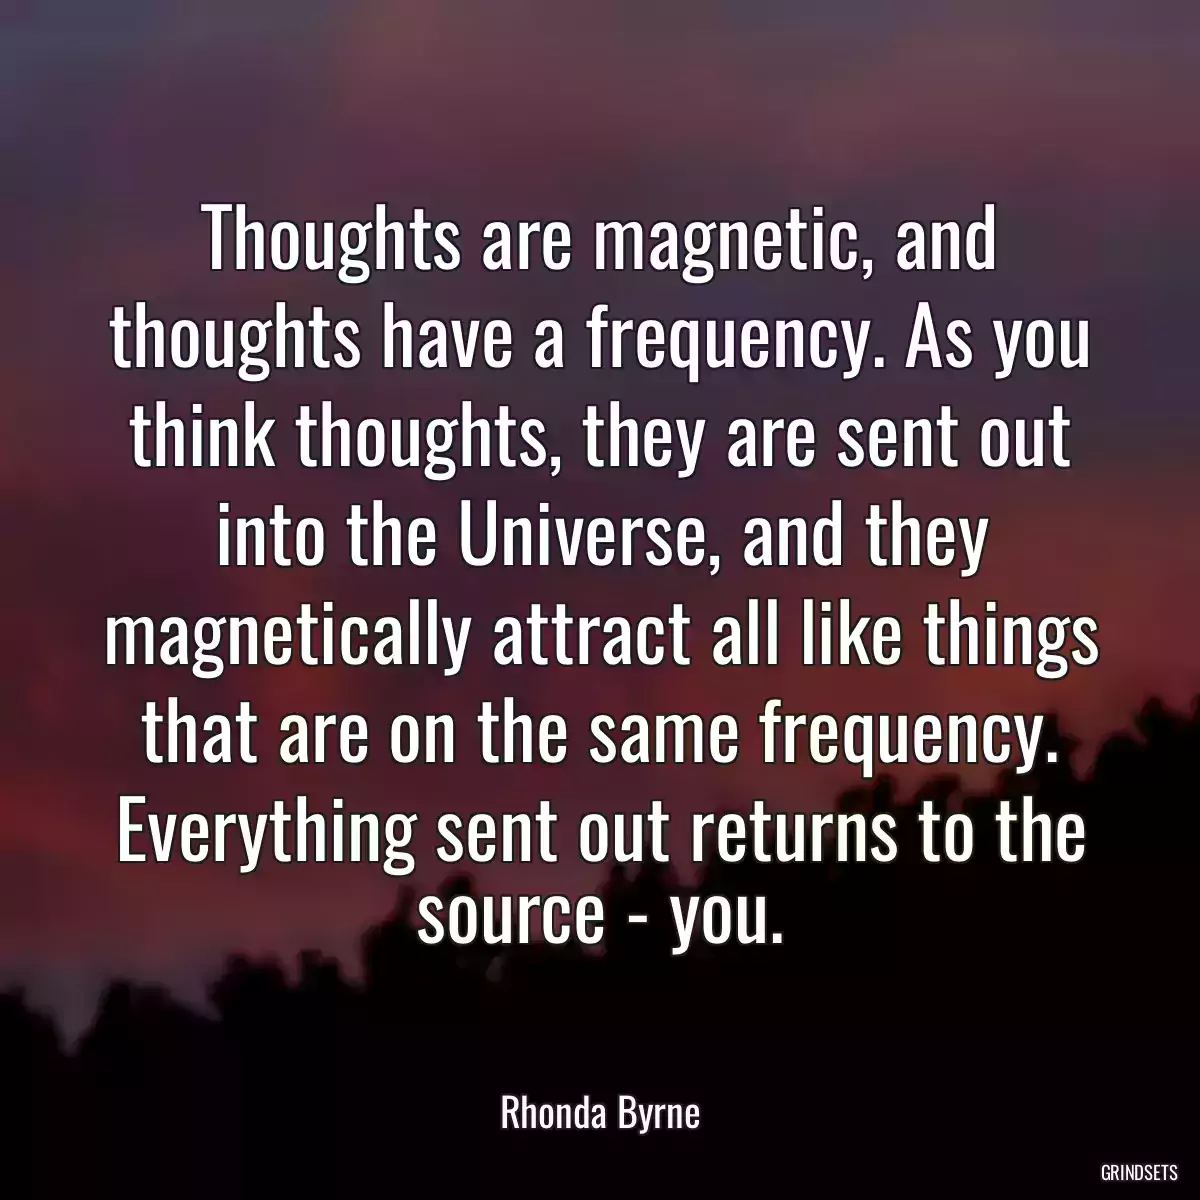 Thoughts are magnetic, and thoughts have a frequency. As you think thoughts, they are sent out into the Universe, and they magnetically attract all like things that are on the same frequency. Everything sent out returns to the source - you.